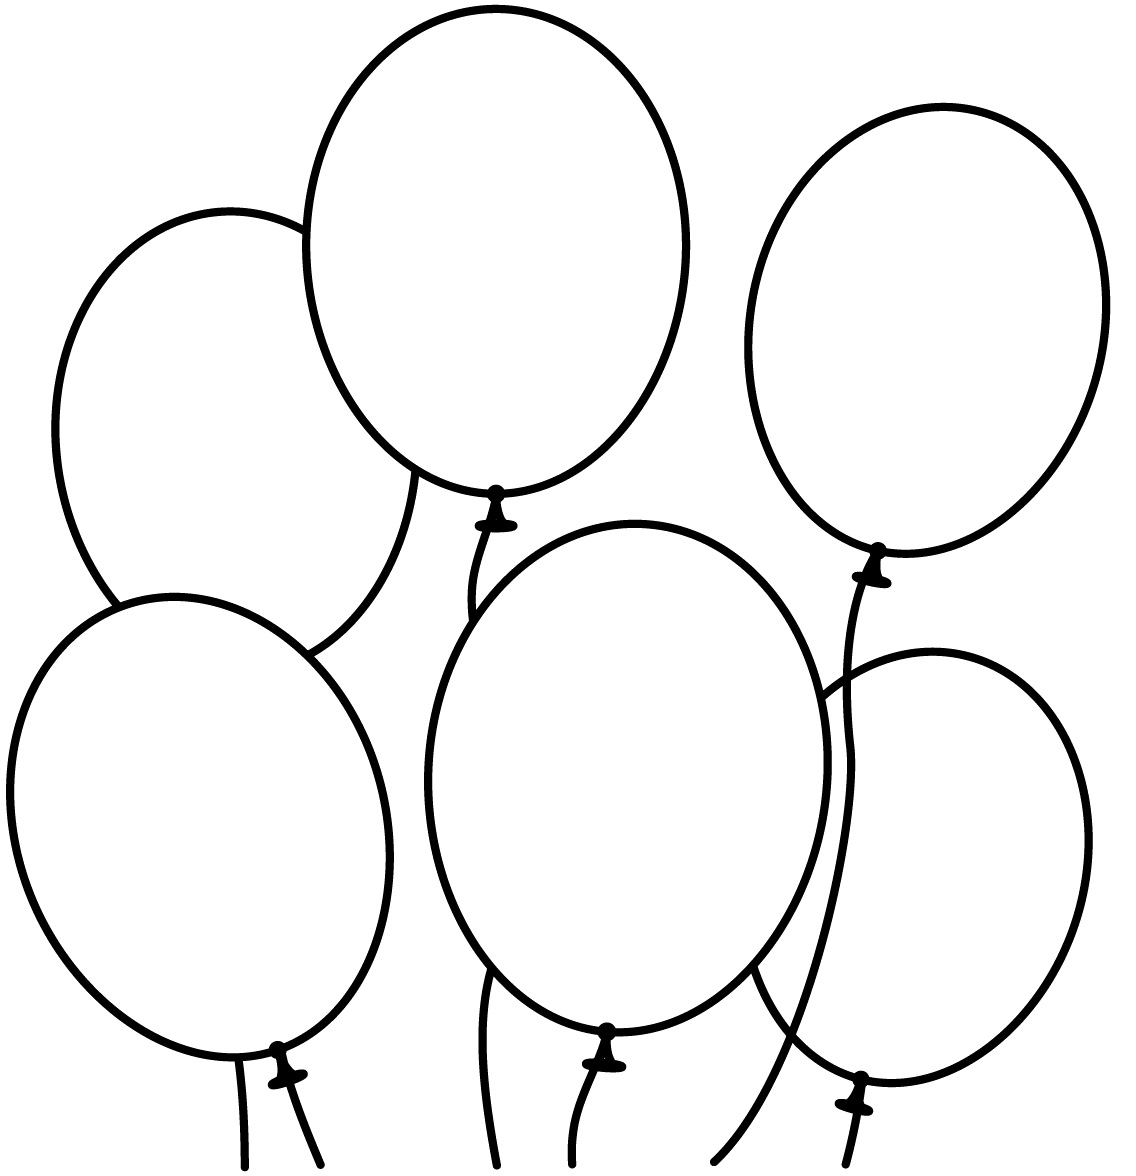 Six Beautiful Balloons Coloring Pages Balloons Coloring Pages ClipArt Best ClipArt Best